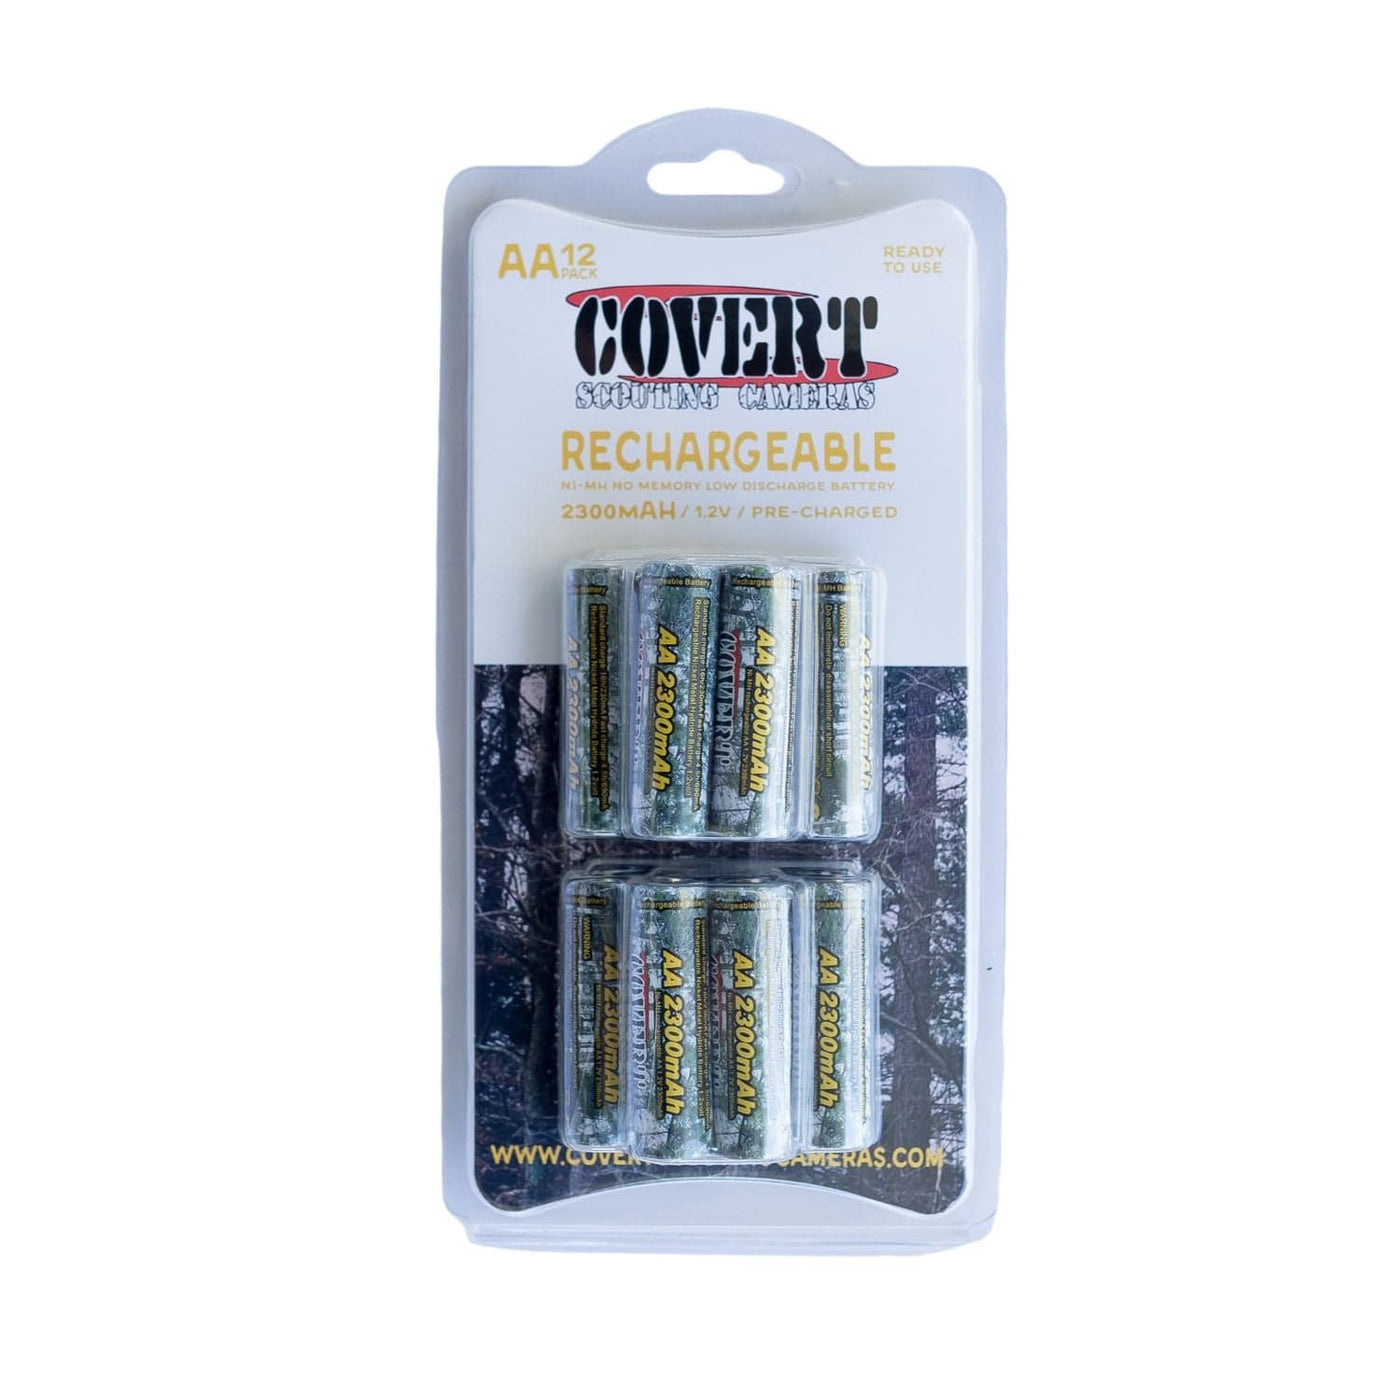 Covert Scouting Cameras Covert AA Rechargeable Batteries Lights